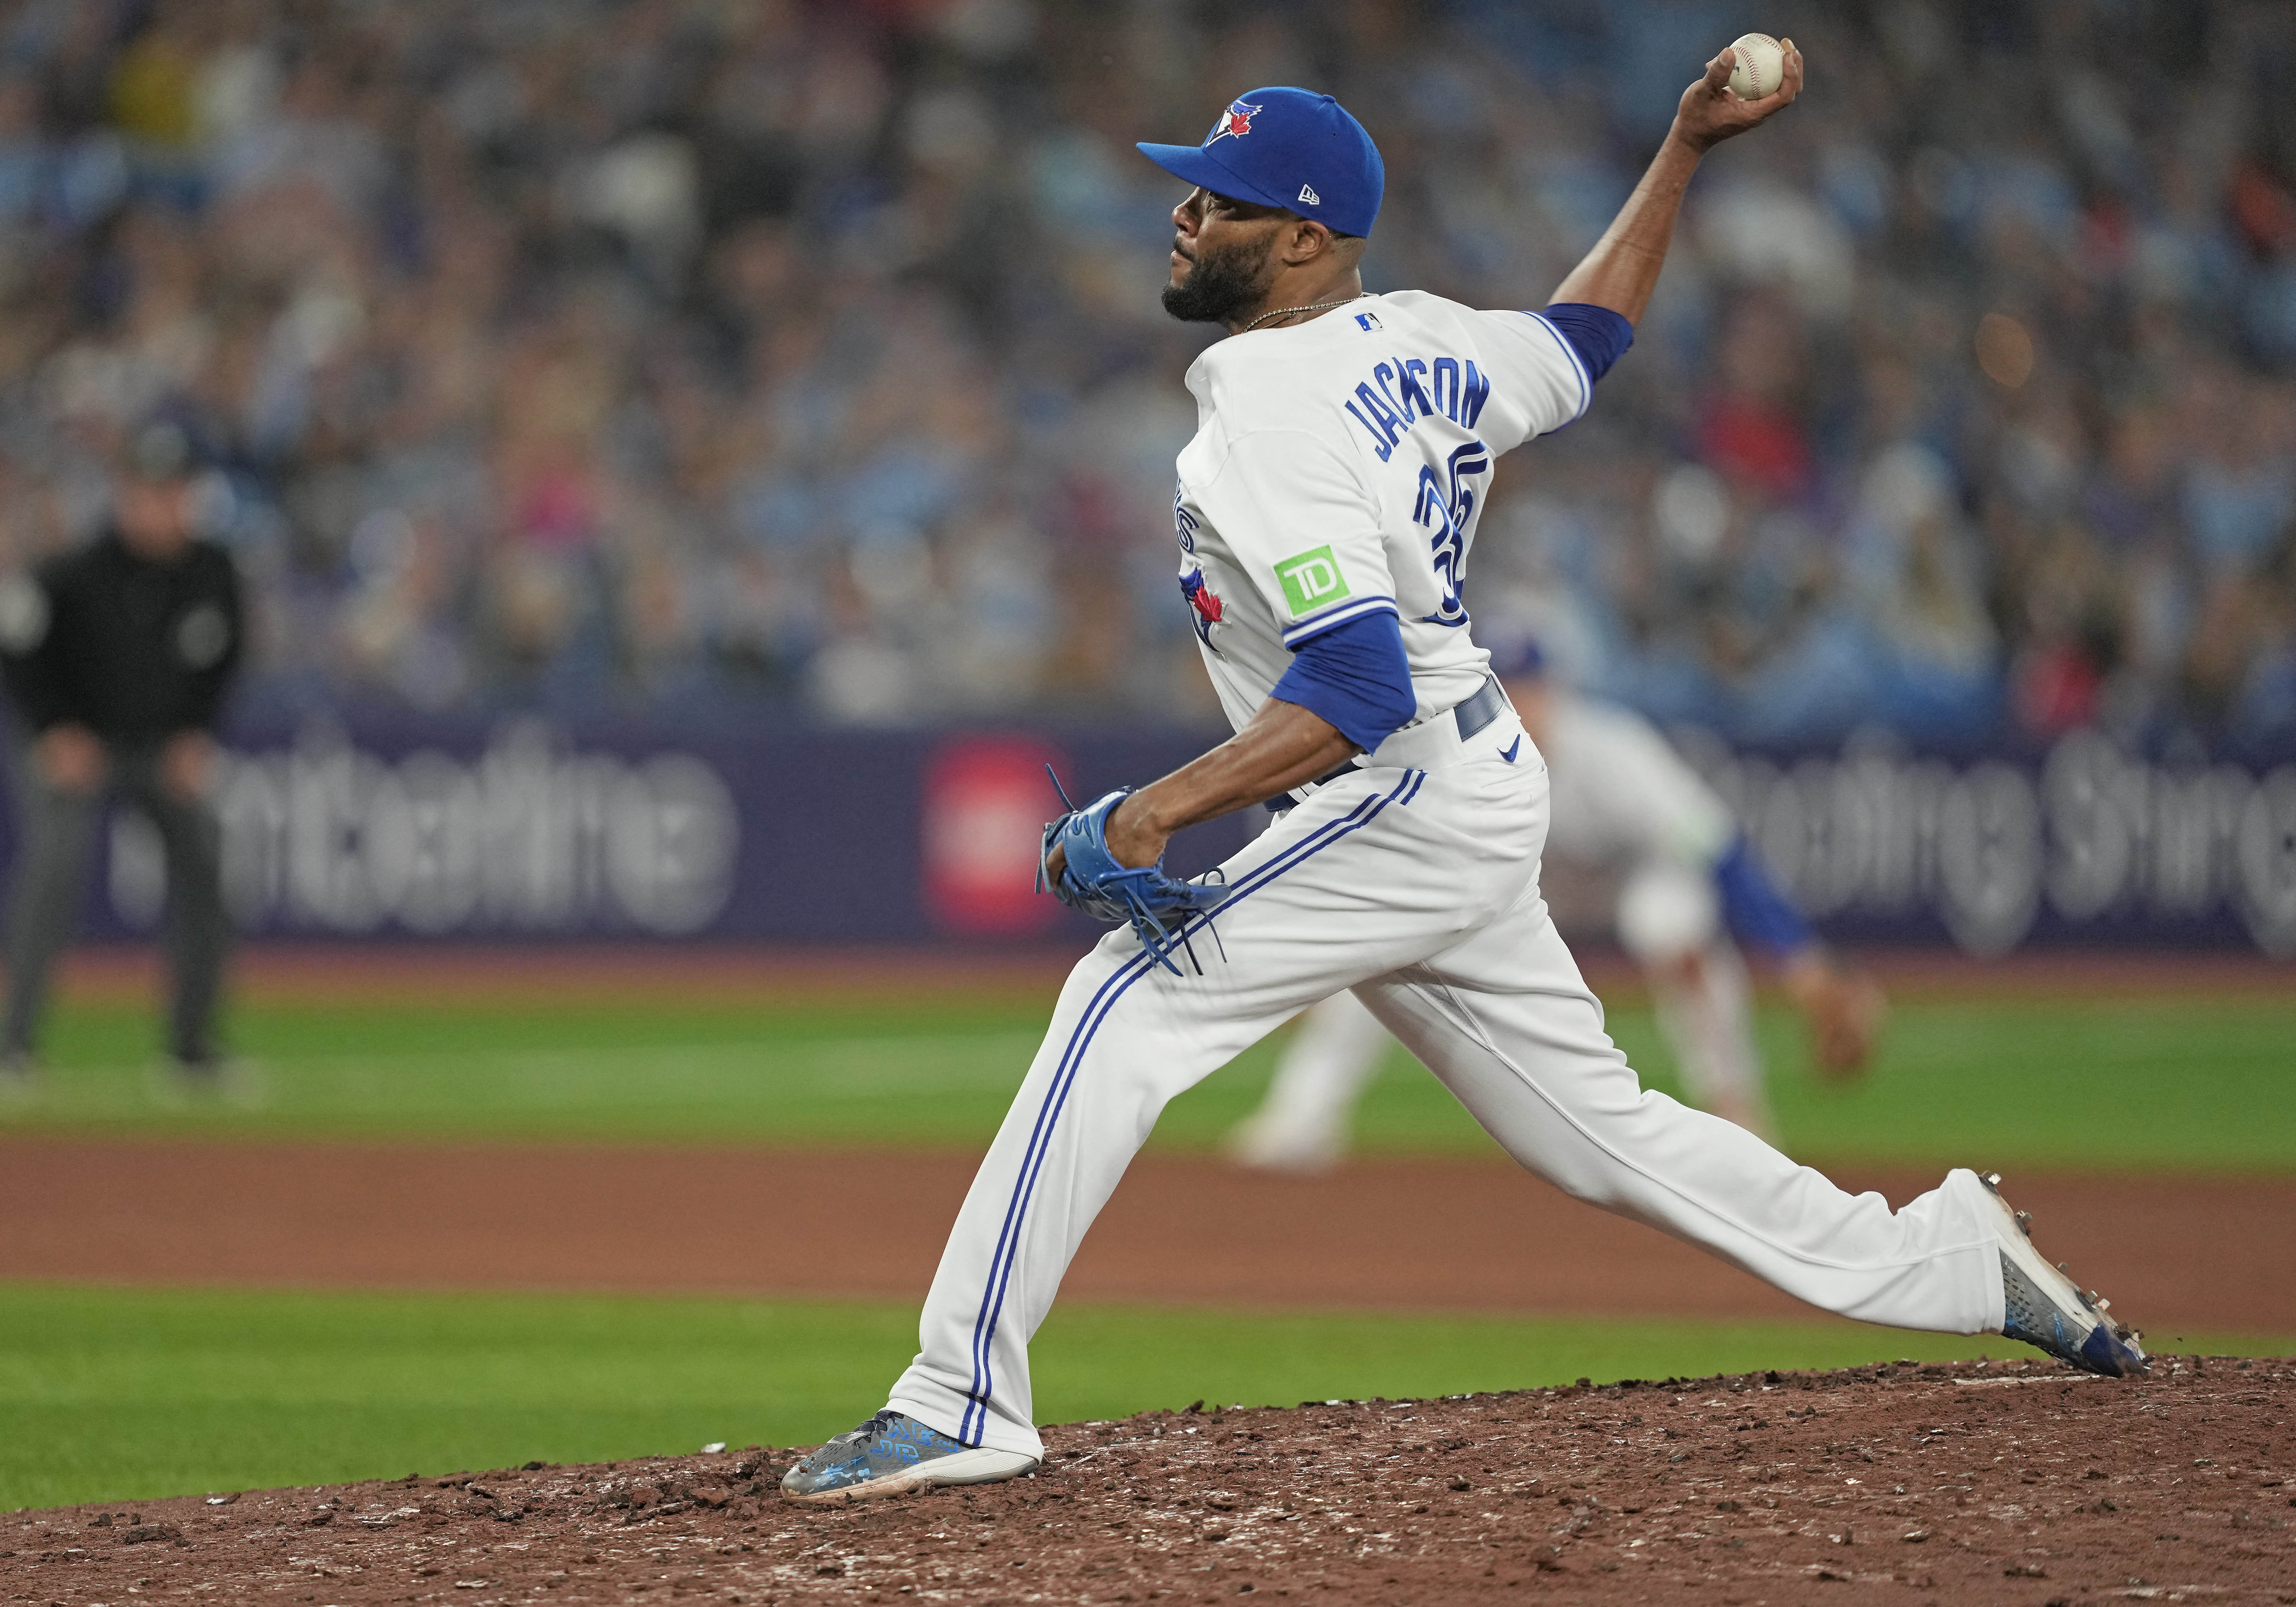 Jays clinch wild-card spot on day off, will celebrate Friday